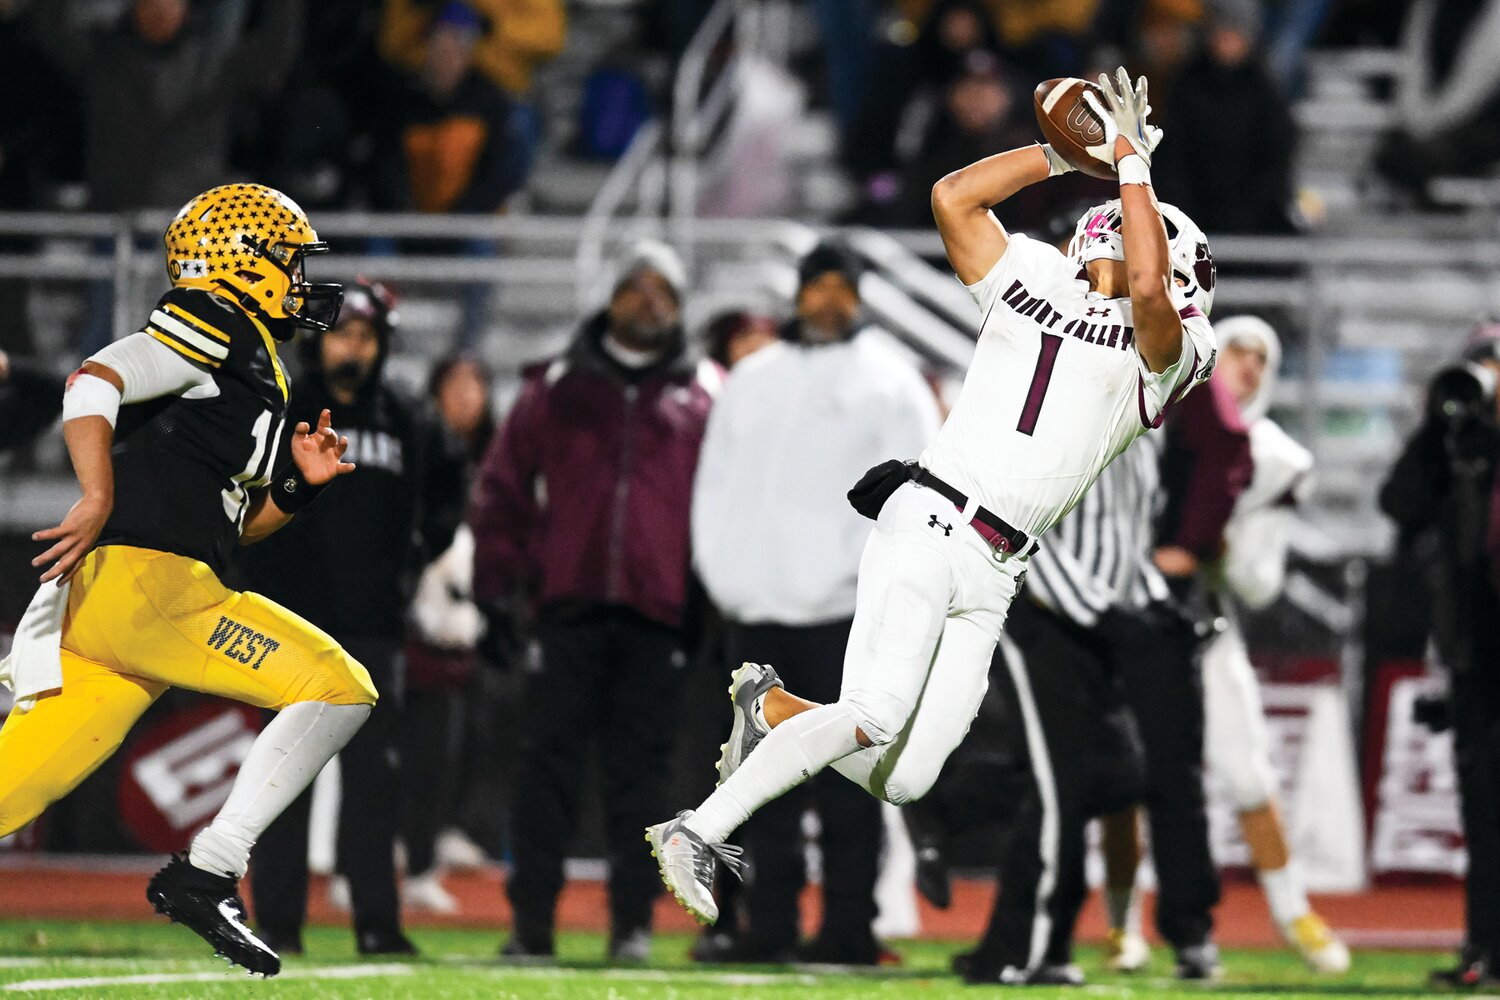 Garnet Valley’s Kai Lopez makes a leaping catch just past Central Bucks West’s Cooper Taylor setting up the second touchdown, making the score 14-7 in the third quarter.